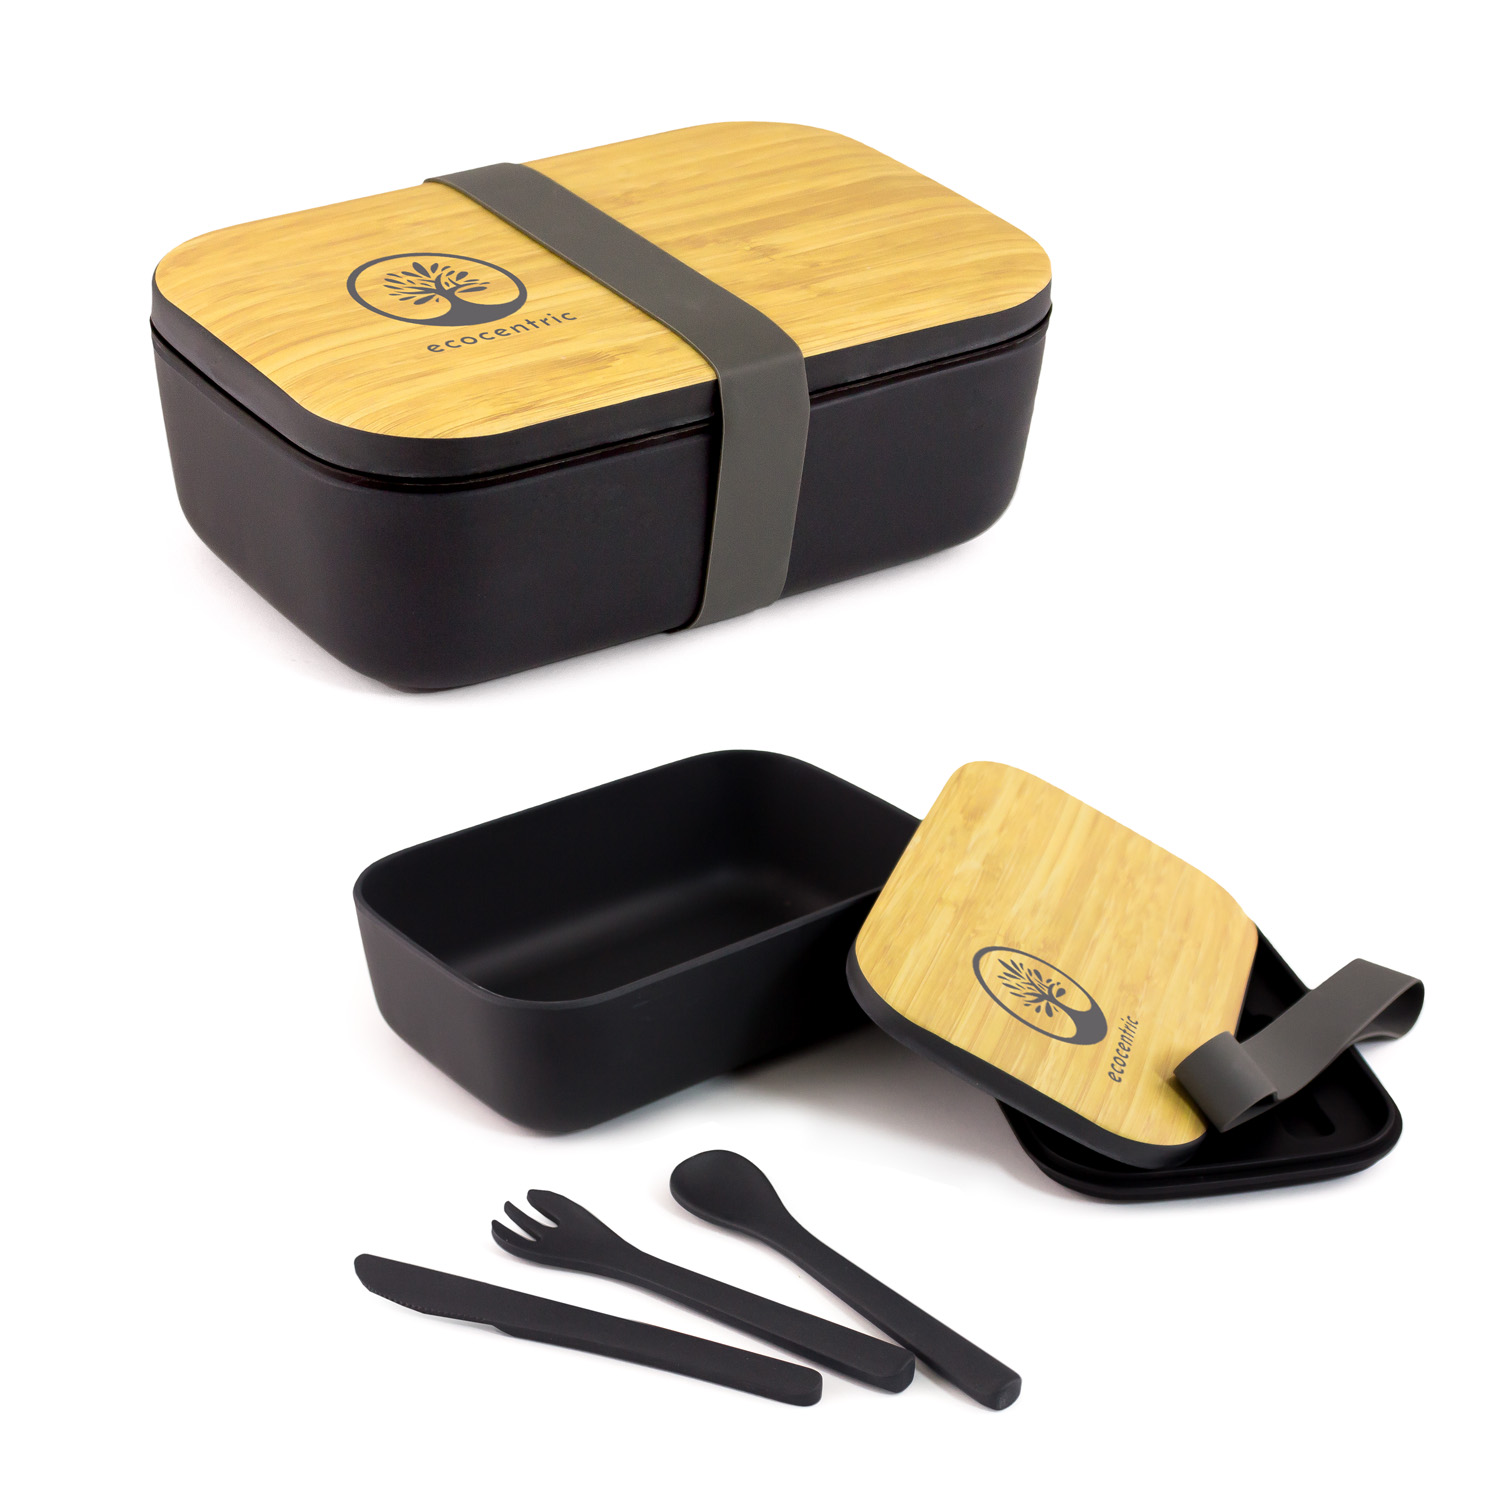 Bamboo Lid Lunch Box + Cutlery Set - All About Promo